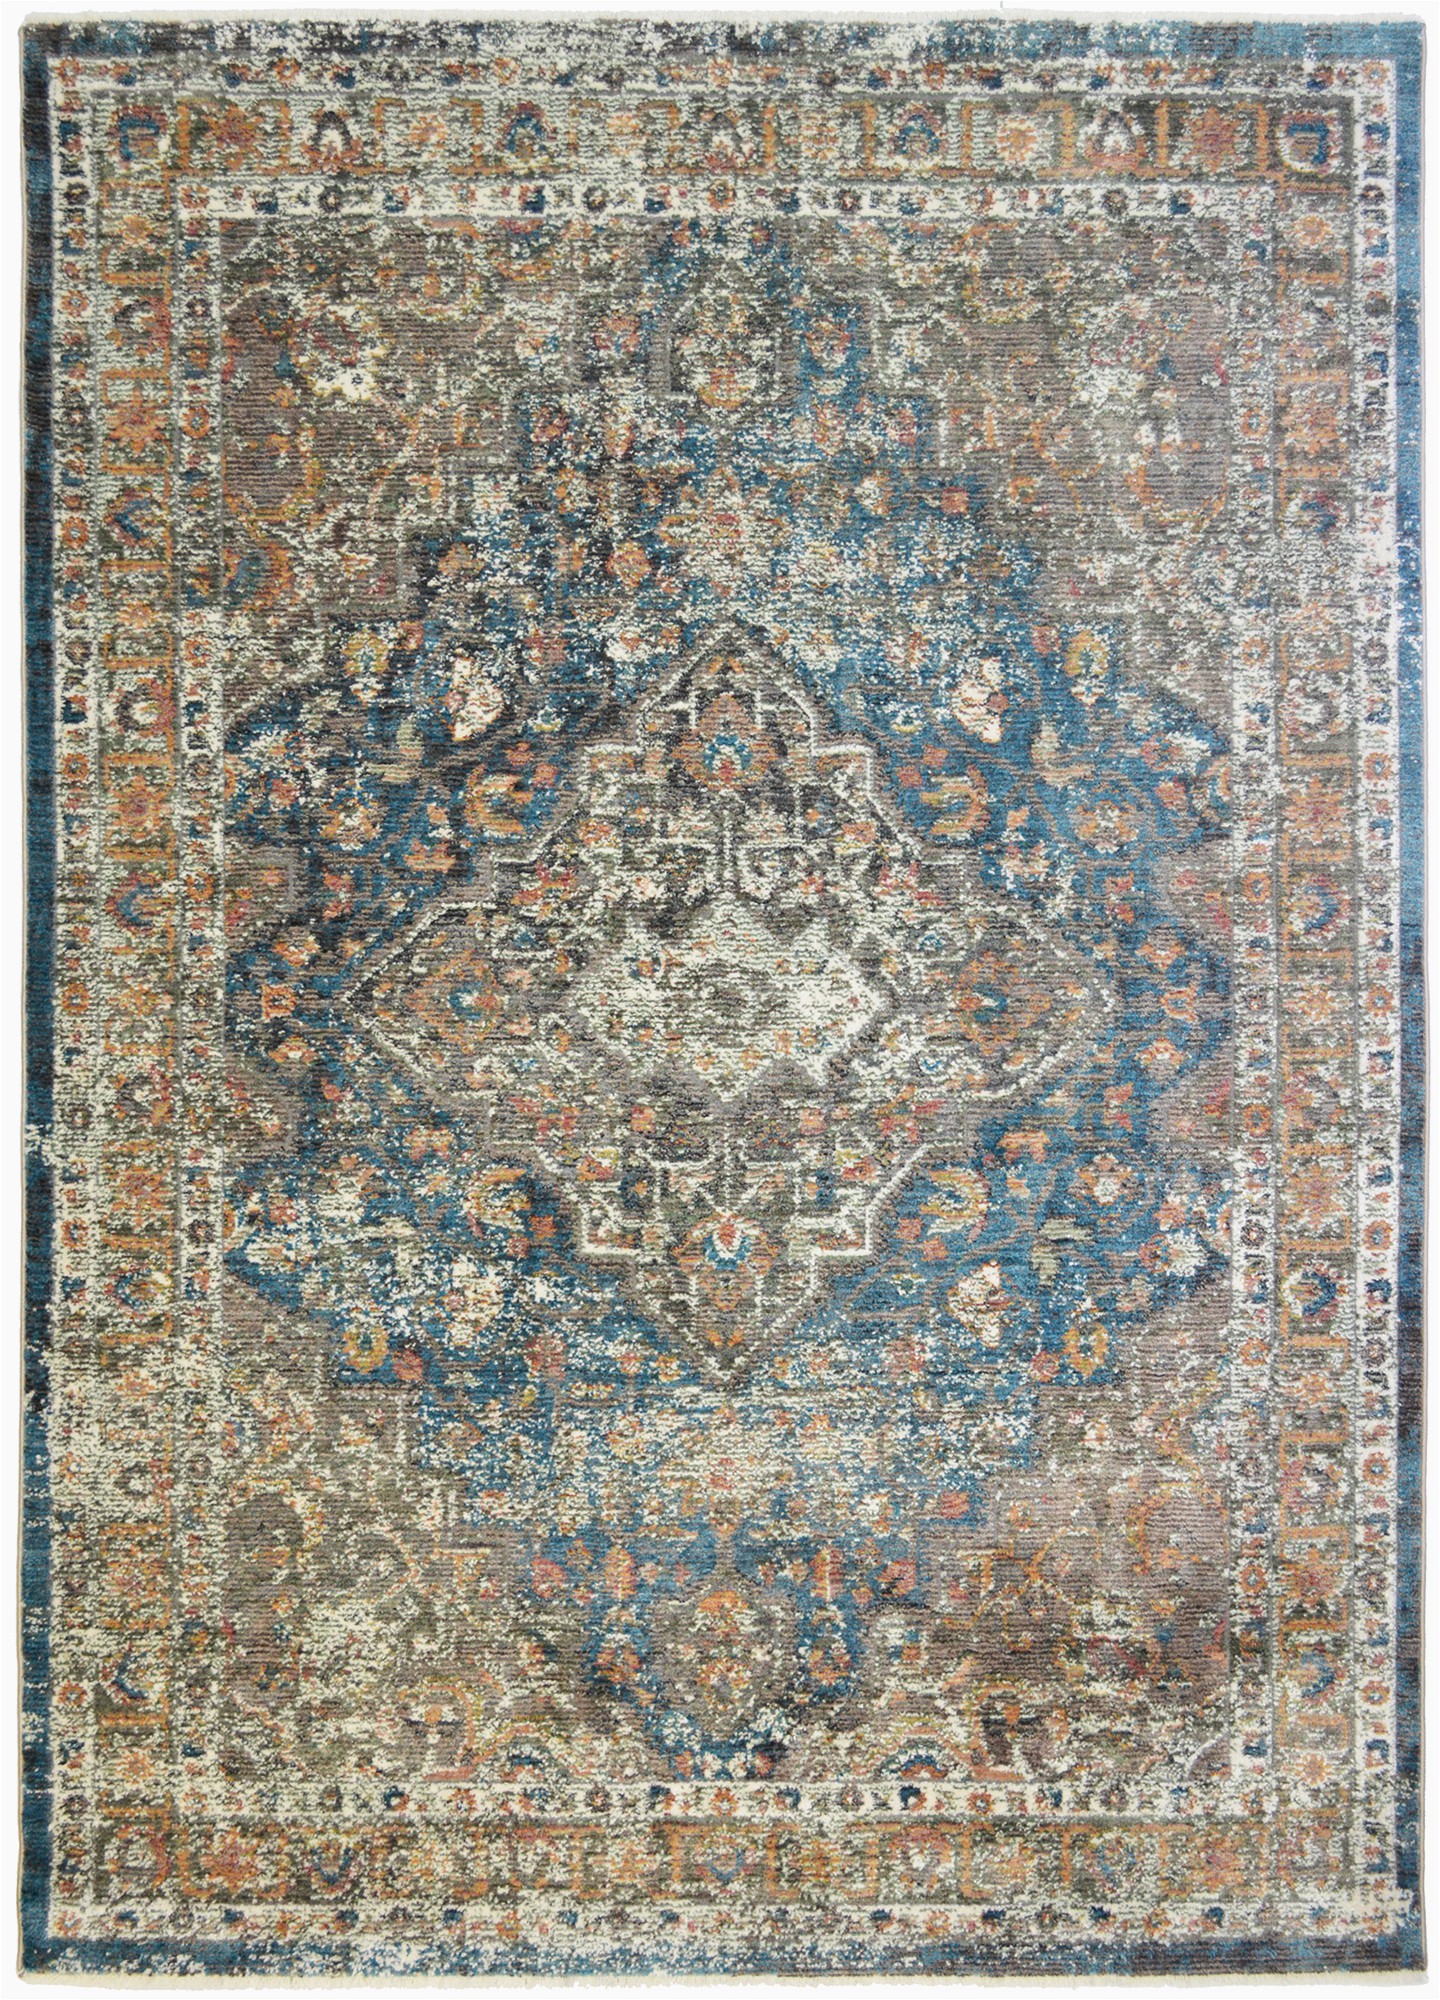 Blue and Brown area Rug Walmart Mayberry Oxford Castle Blue area Rug